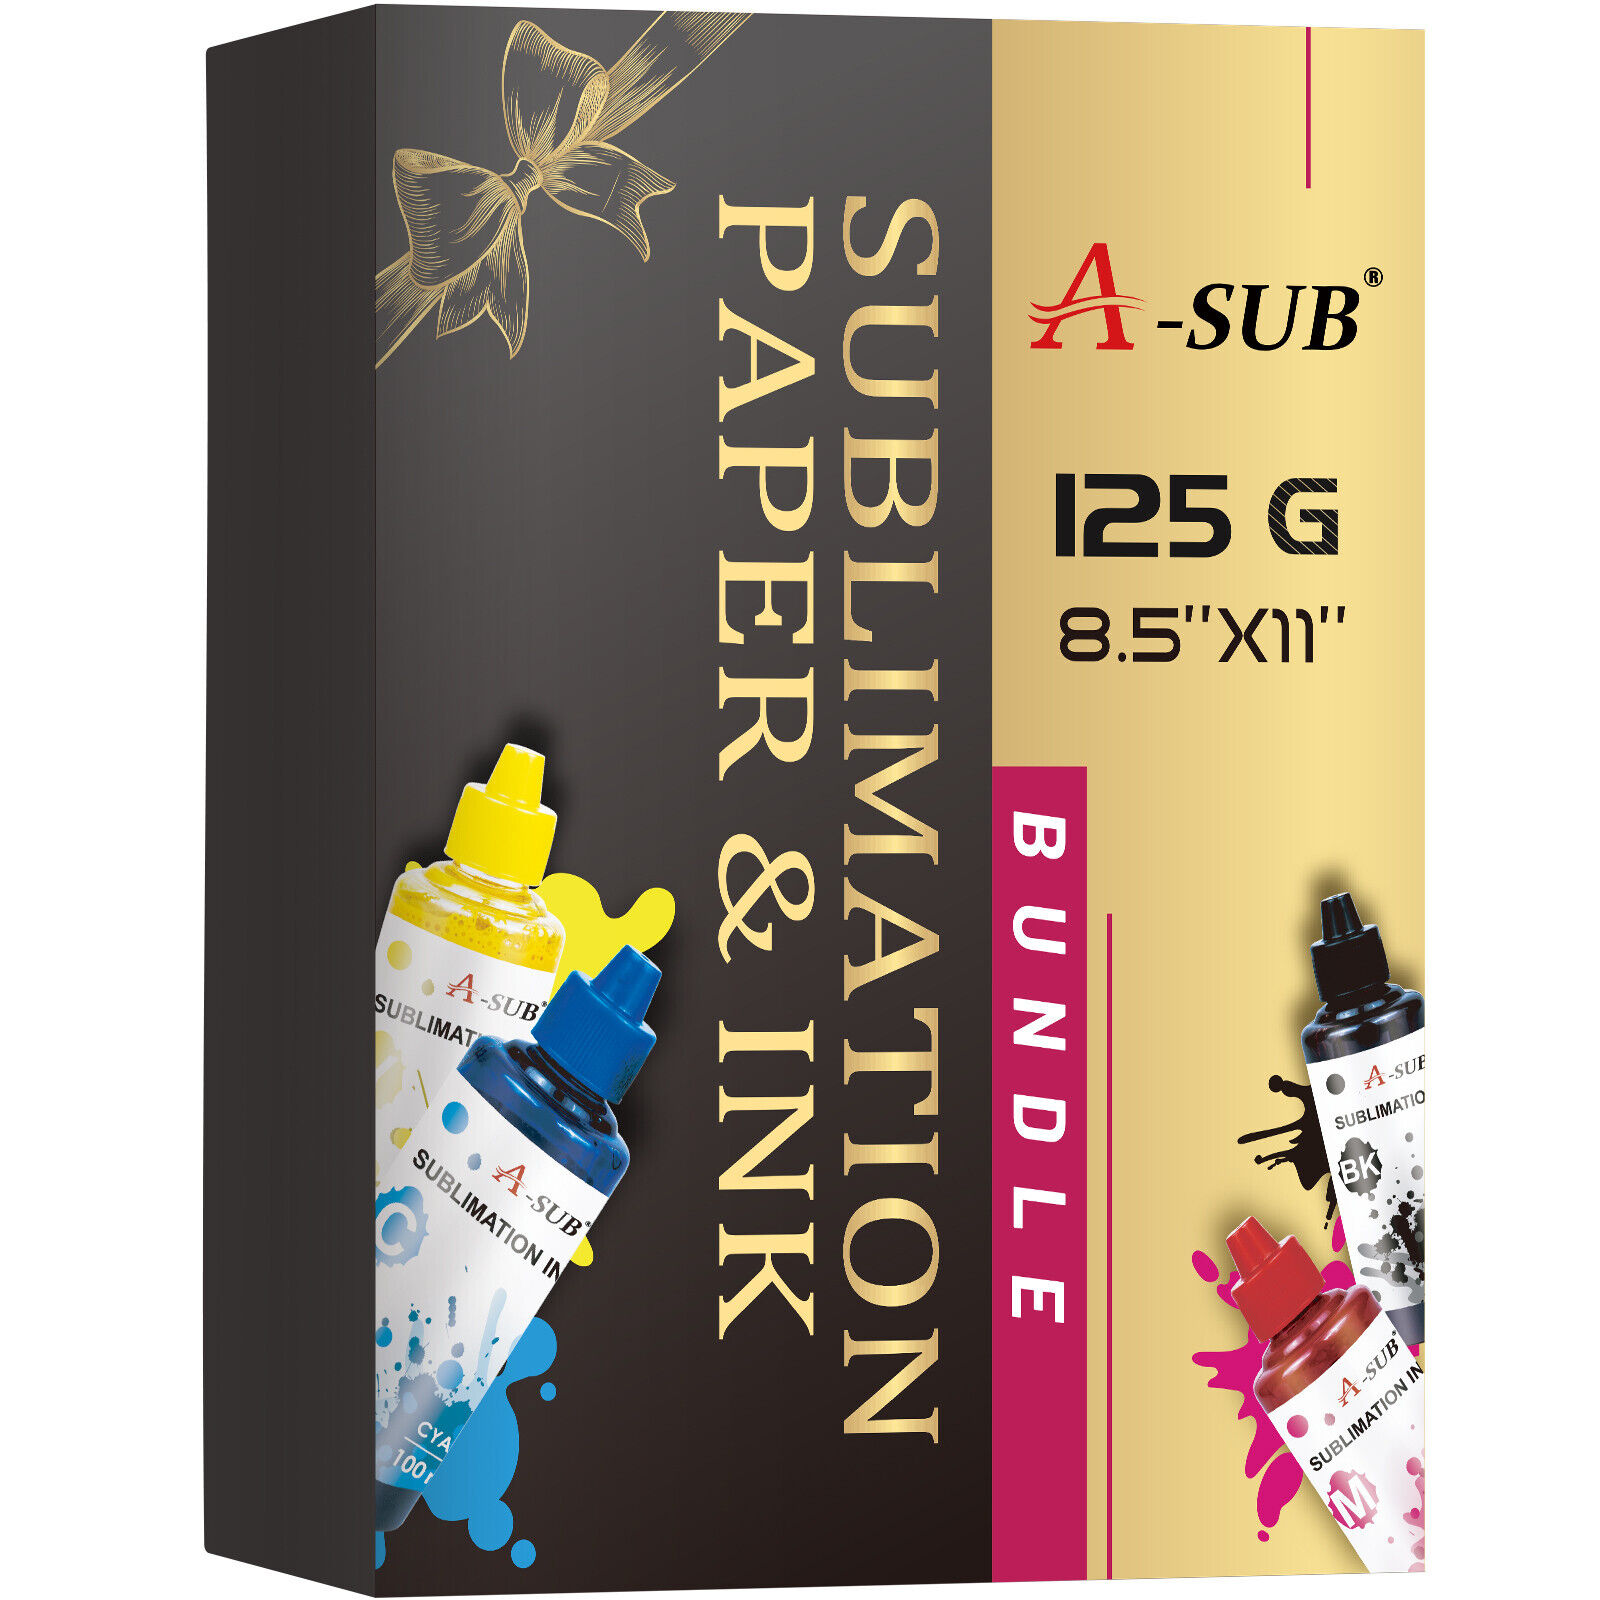 A-SUB Sublimation Starter Kit - A-SUB Sublimation Paper and Sublimation Ink